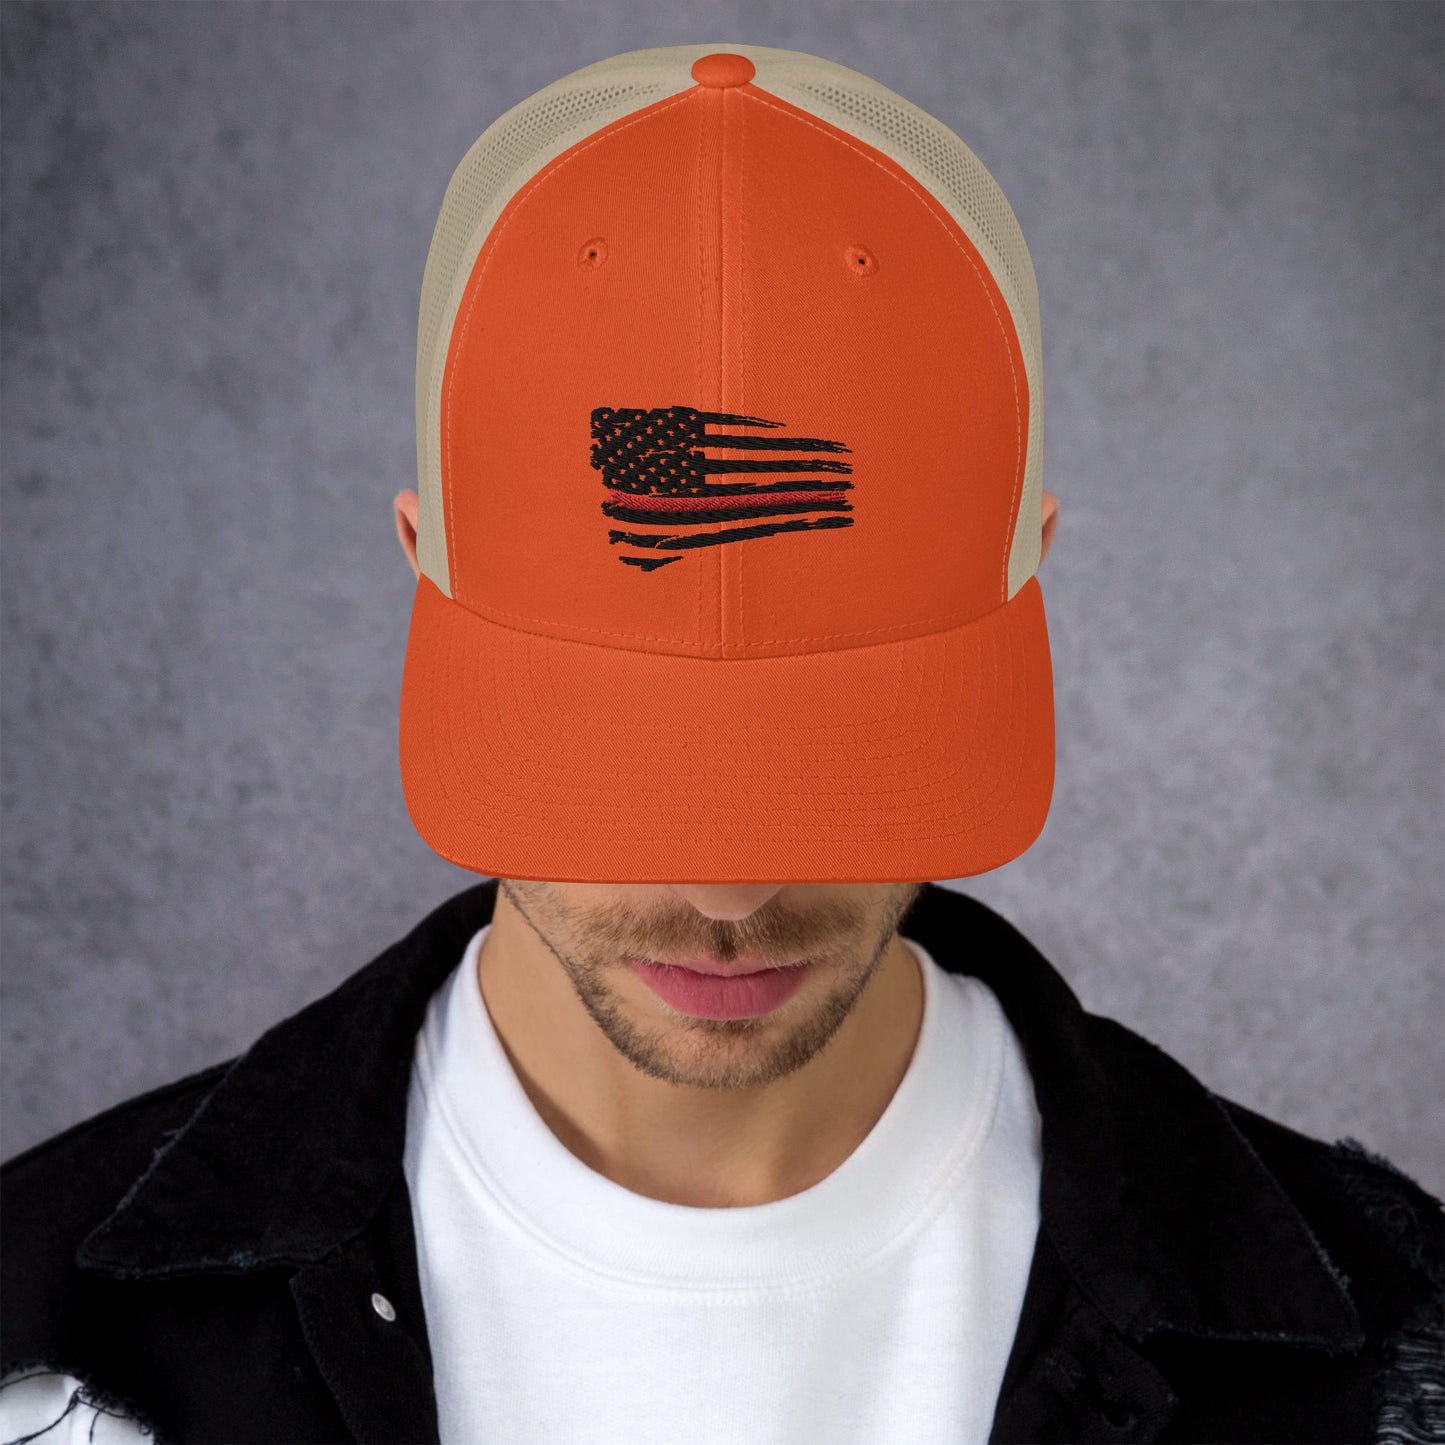 Thin Red Line Tethered Flag Yupoong Trucker Cap